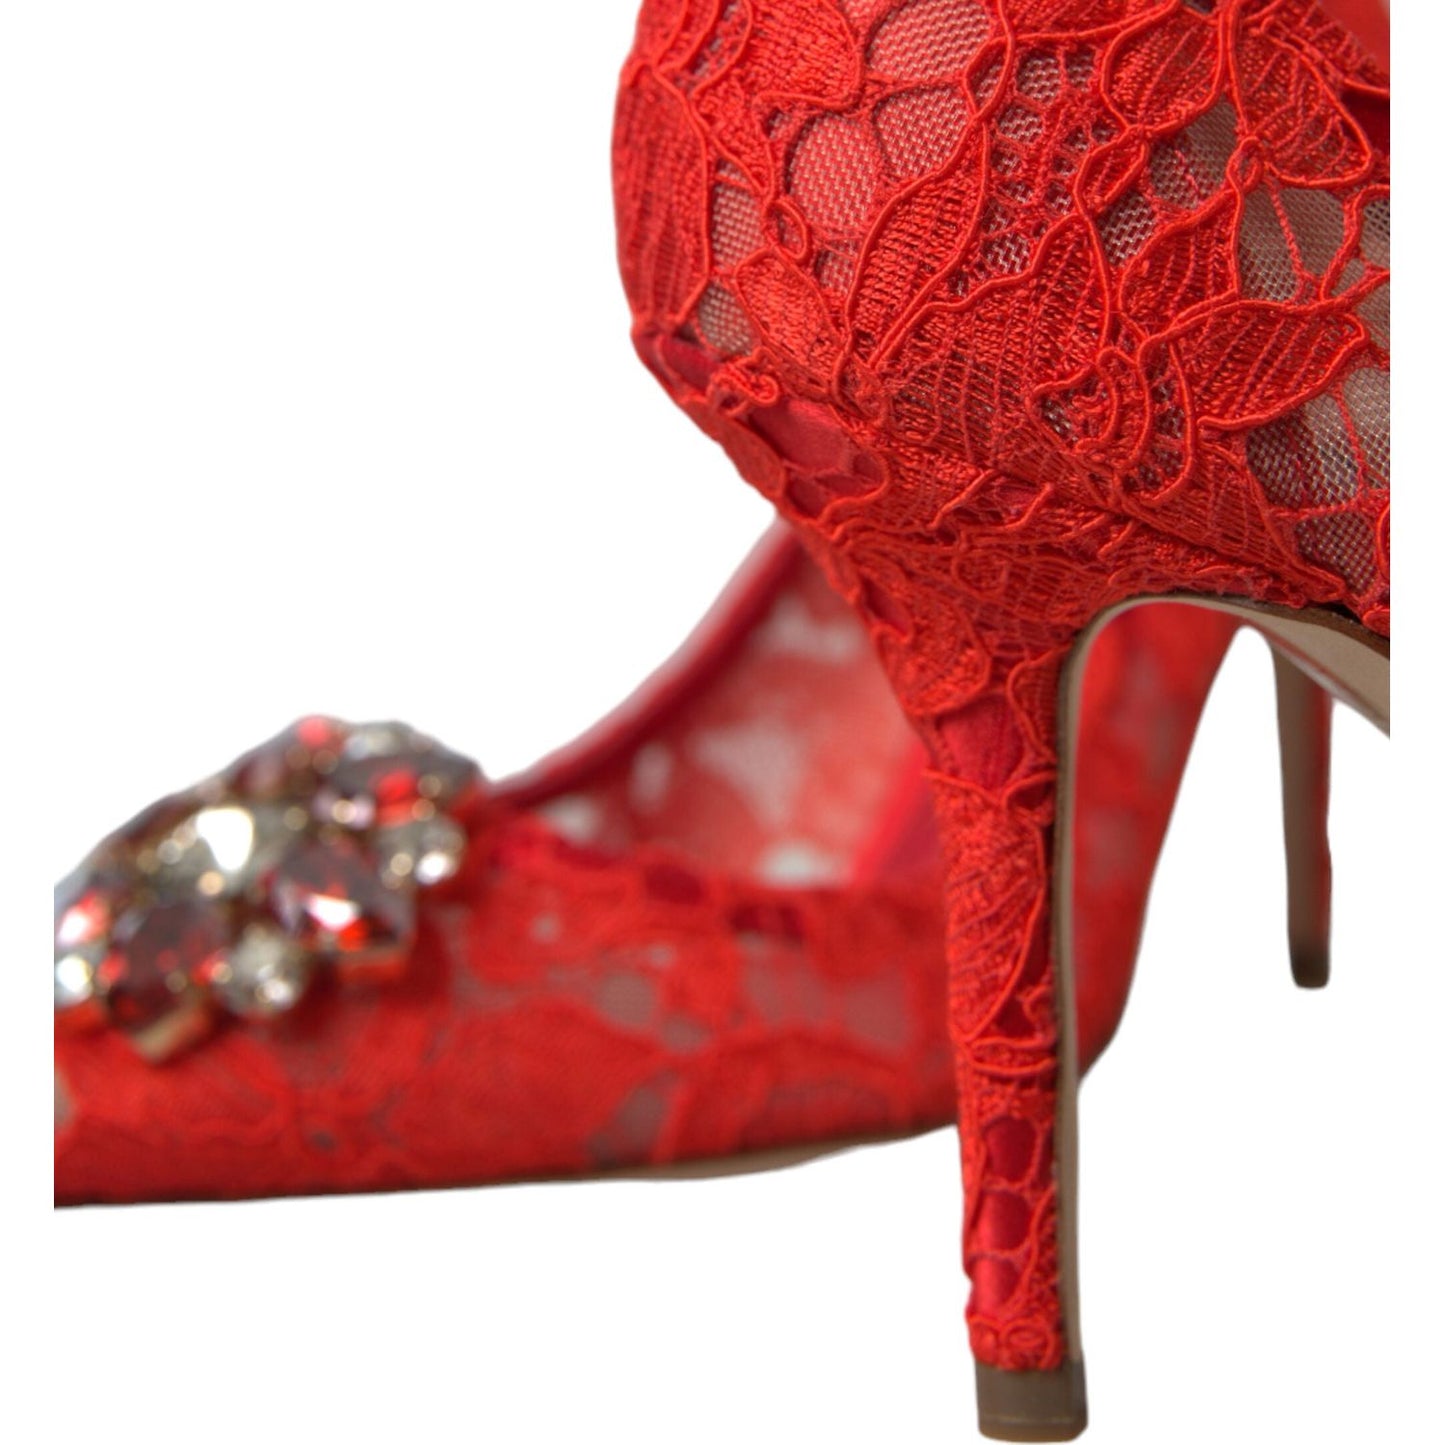 Dolce & Gabbana Exquisite Crystal-Embellished Red Lace Heels red-taormina-lace-crystal-heels-pumps-shoes-1 465A9200-bg-scaled-6d5f2e7d-ef3.jpg